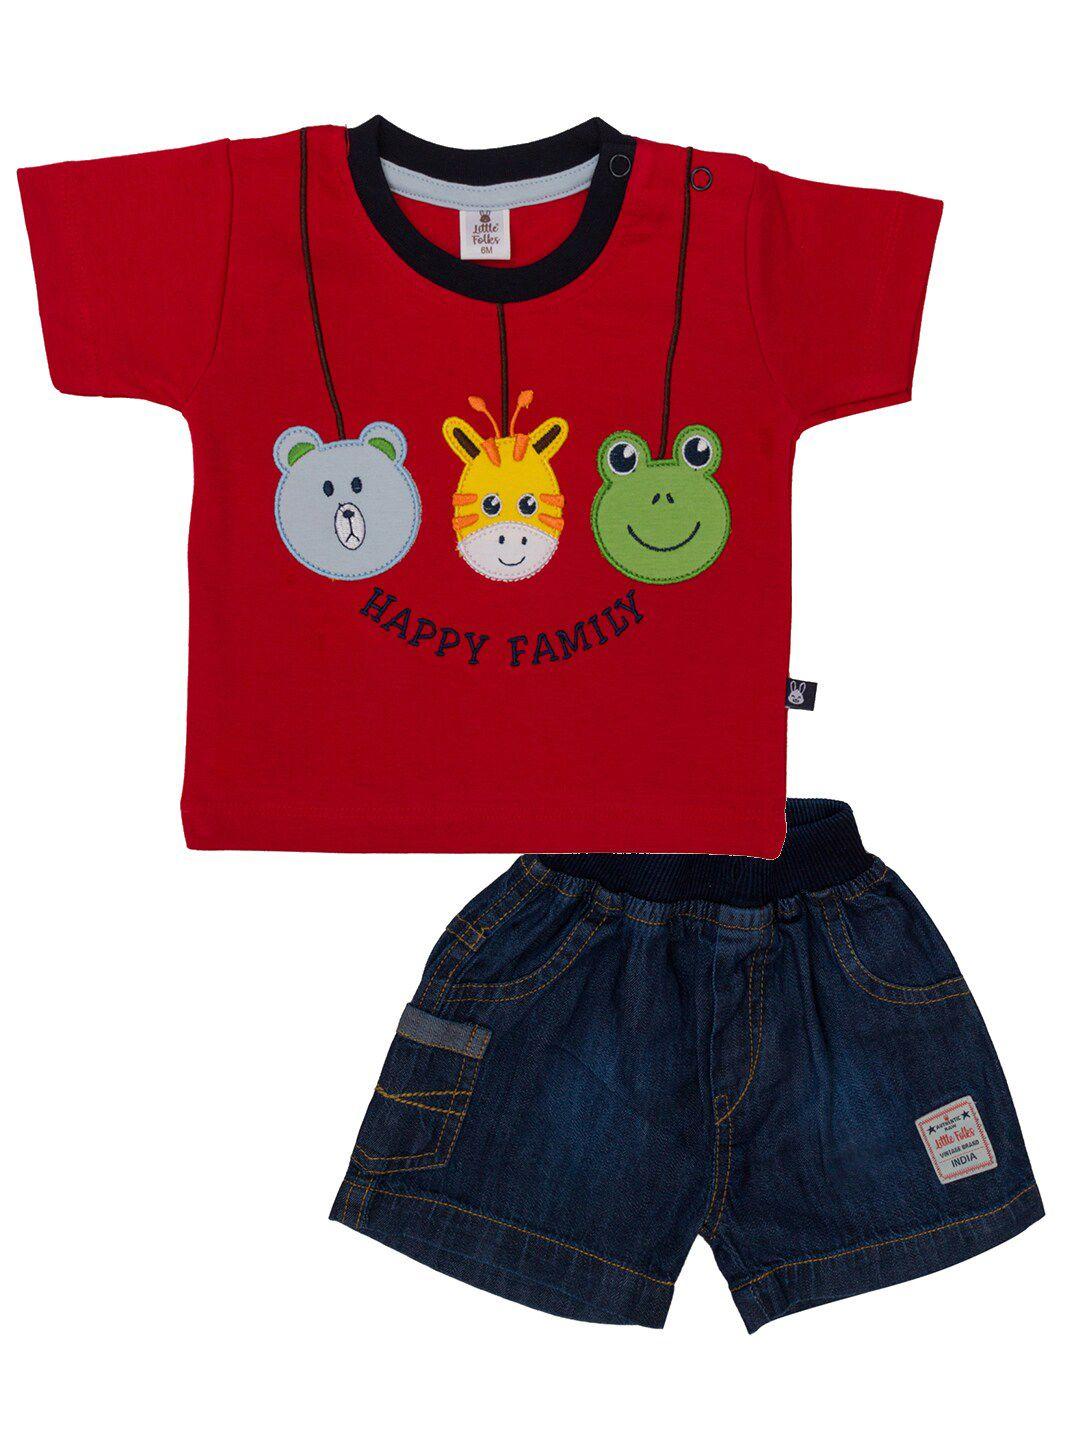 little folks boys red & yellow printed applique pure cotton t-shirt with shorts